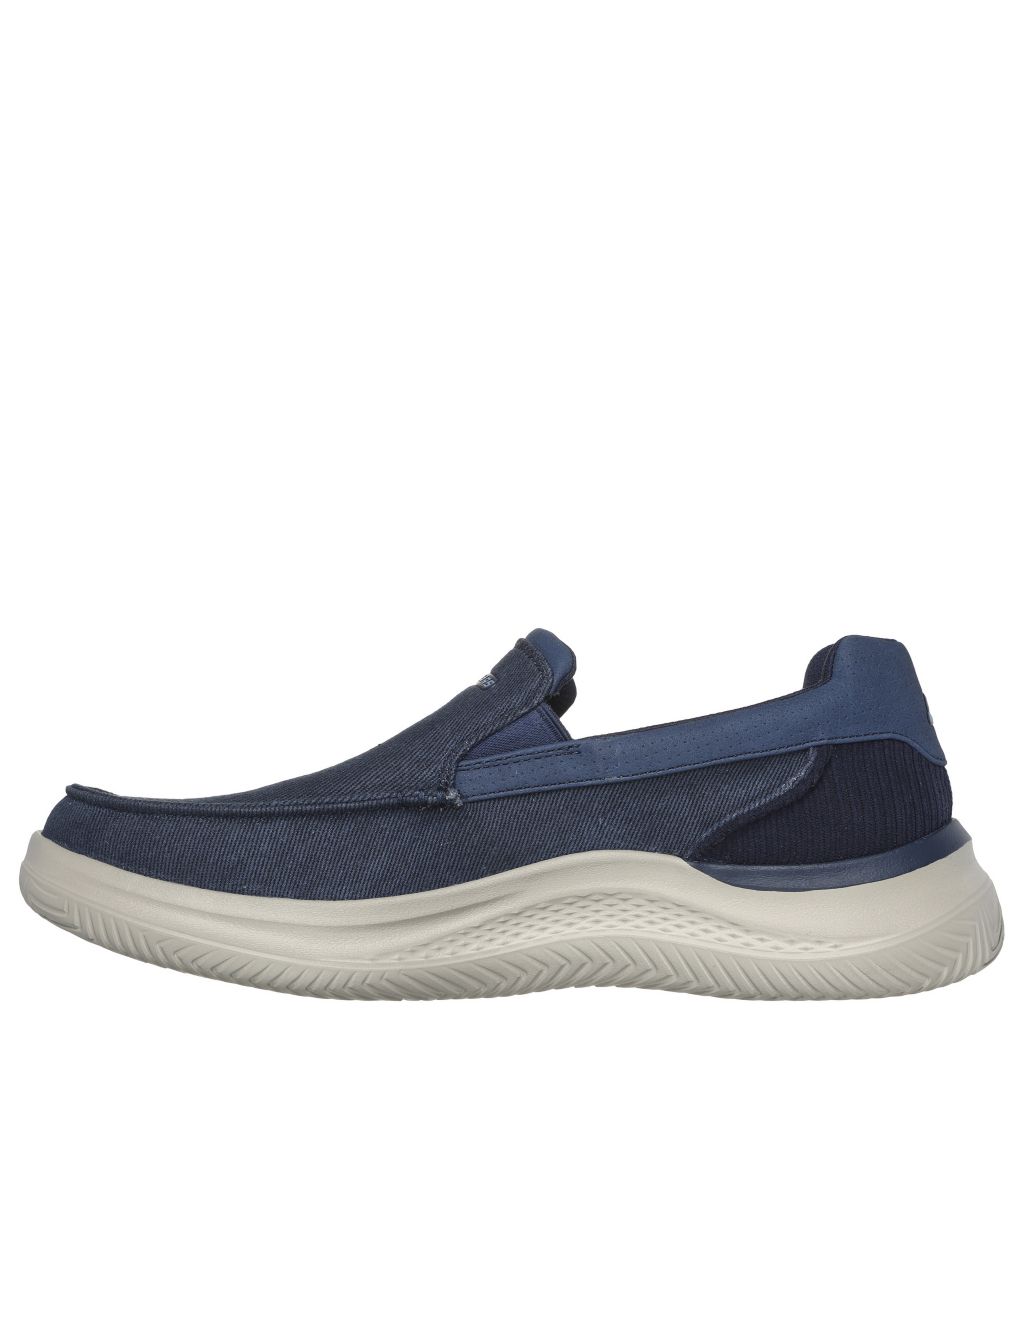 Hasting Fielden Slip-On Trainers 2 of 5